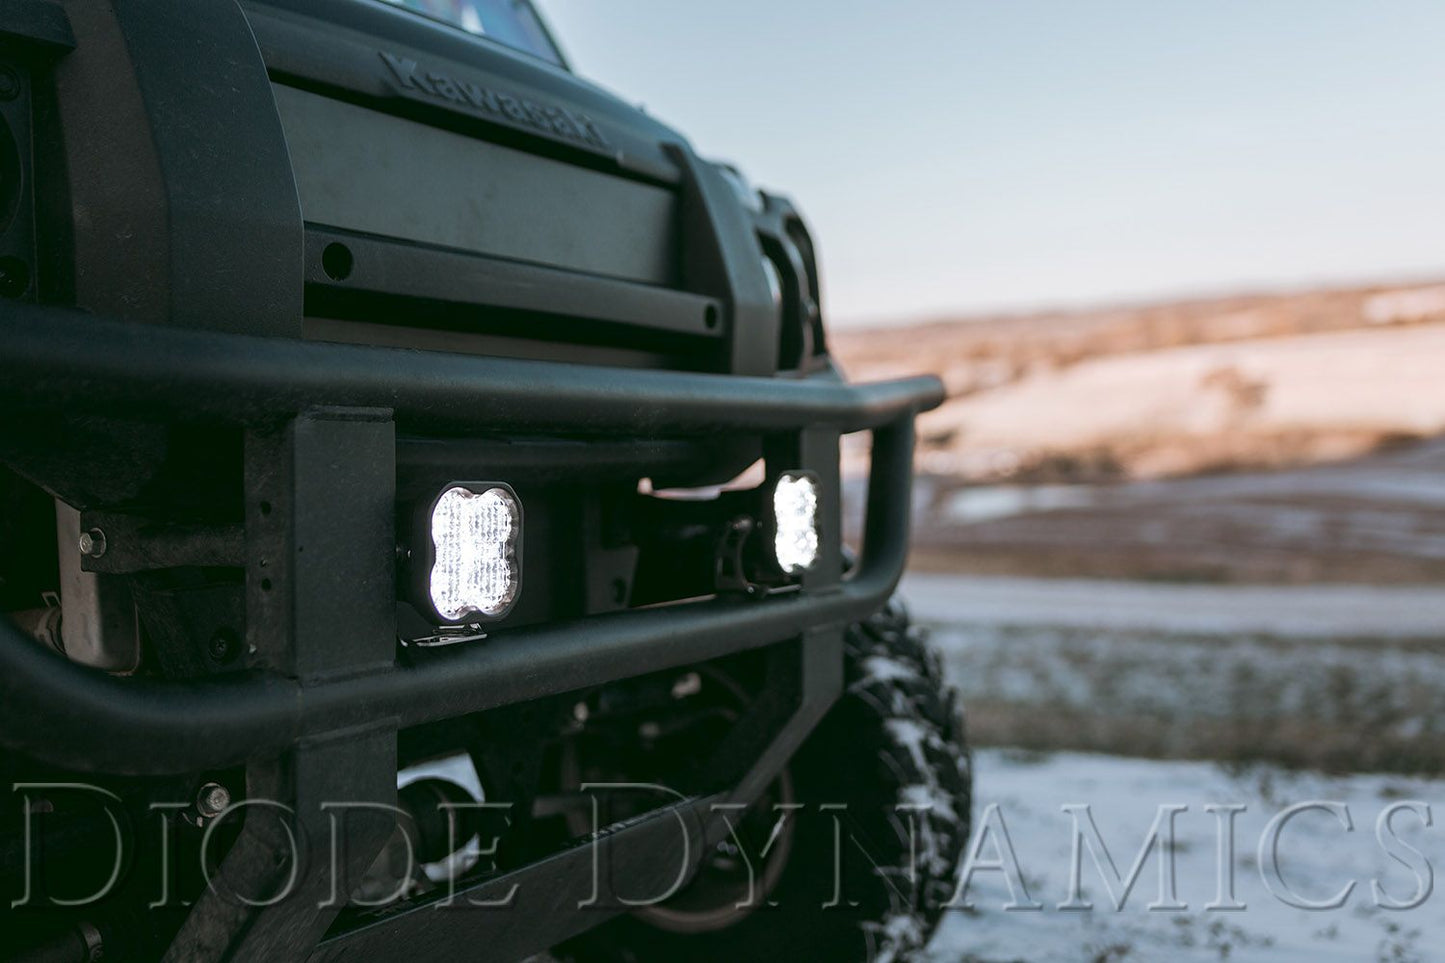 Diode Dynamics SS3 Offroad LED Pods: Standard/Square (Universal)